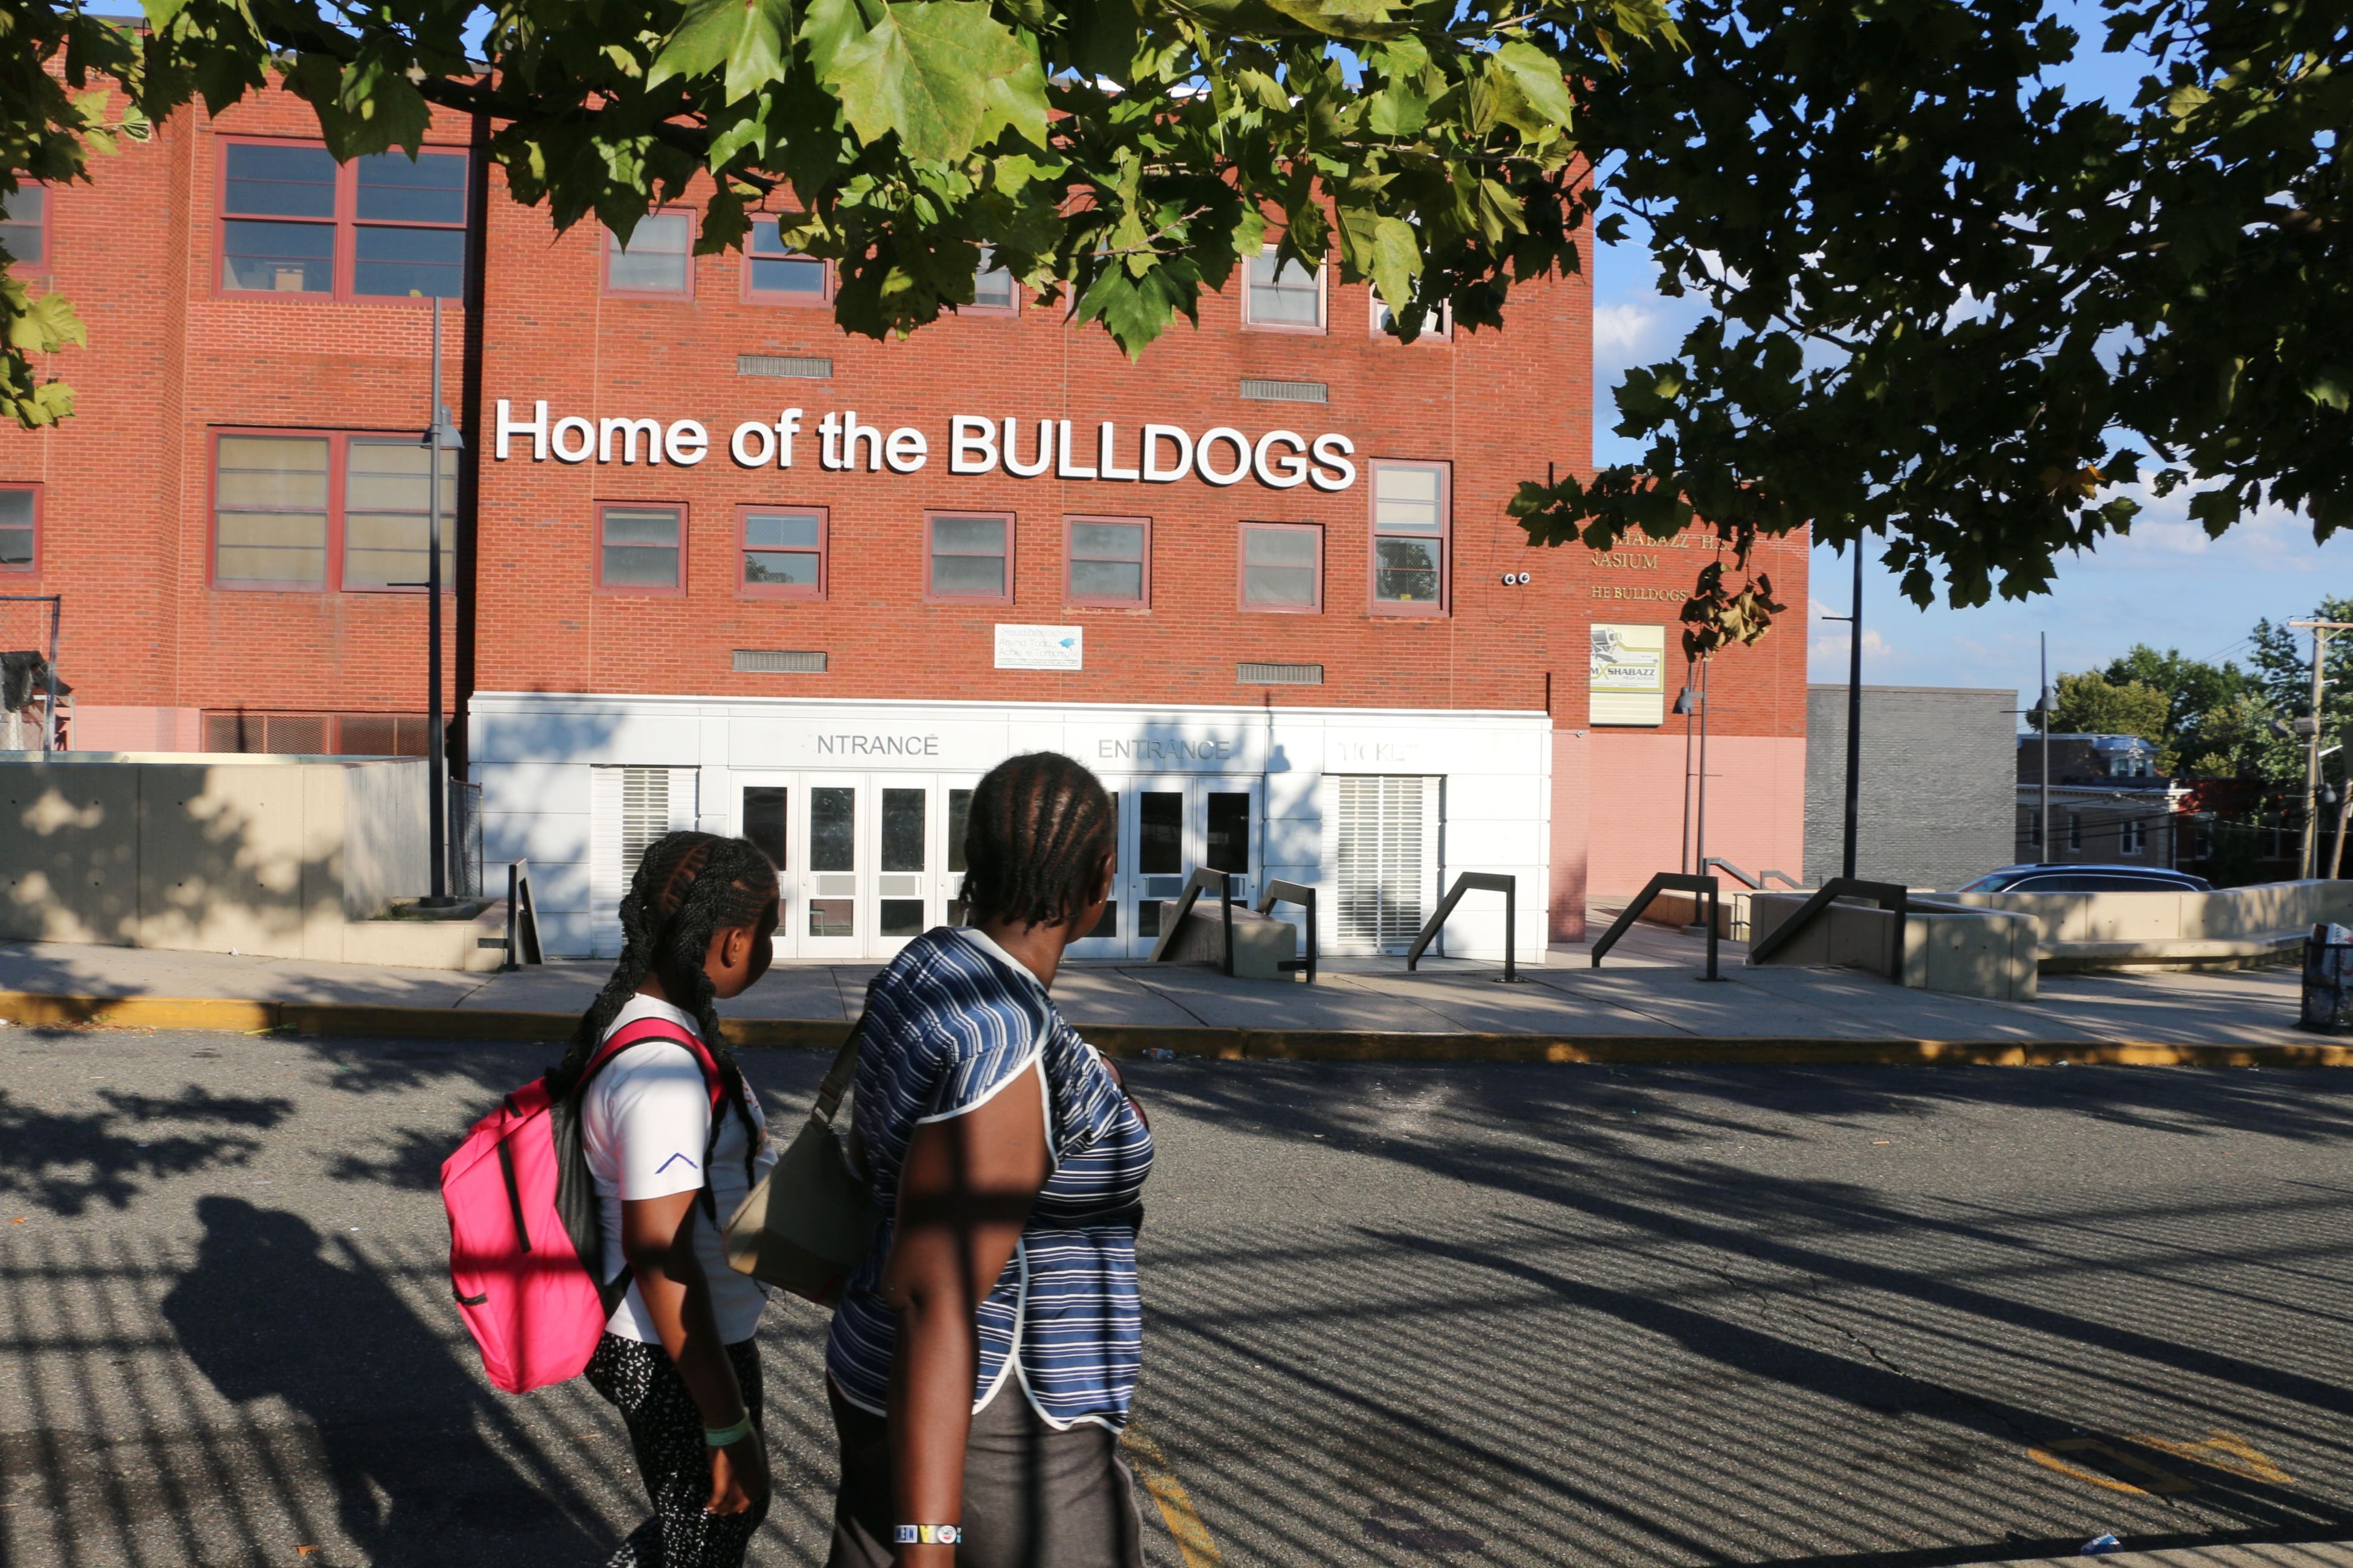 In the foreground, a student wearing a pink backpack stands behind an adult in a blue-striped shirt as they face Malcolm X Shabazz High School in the background.